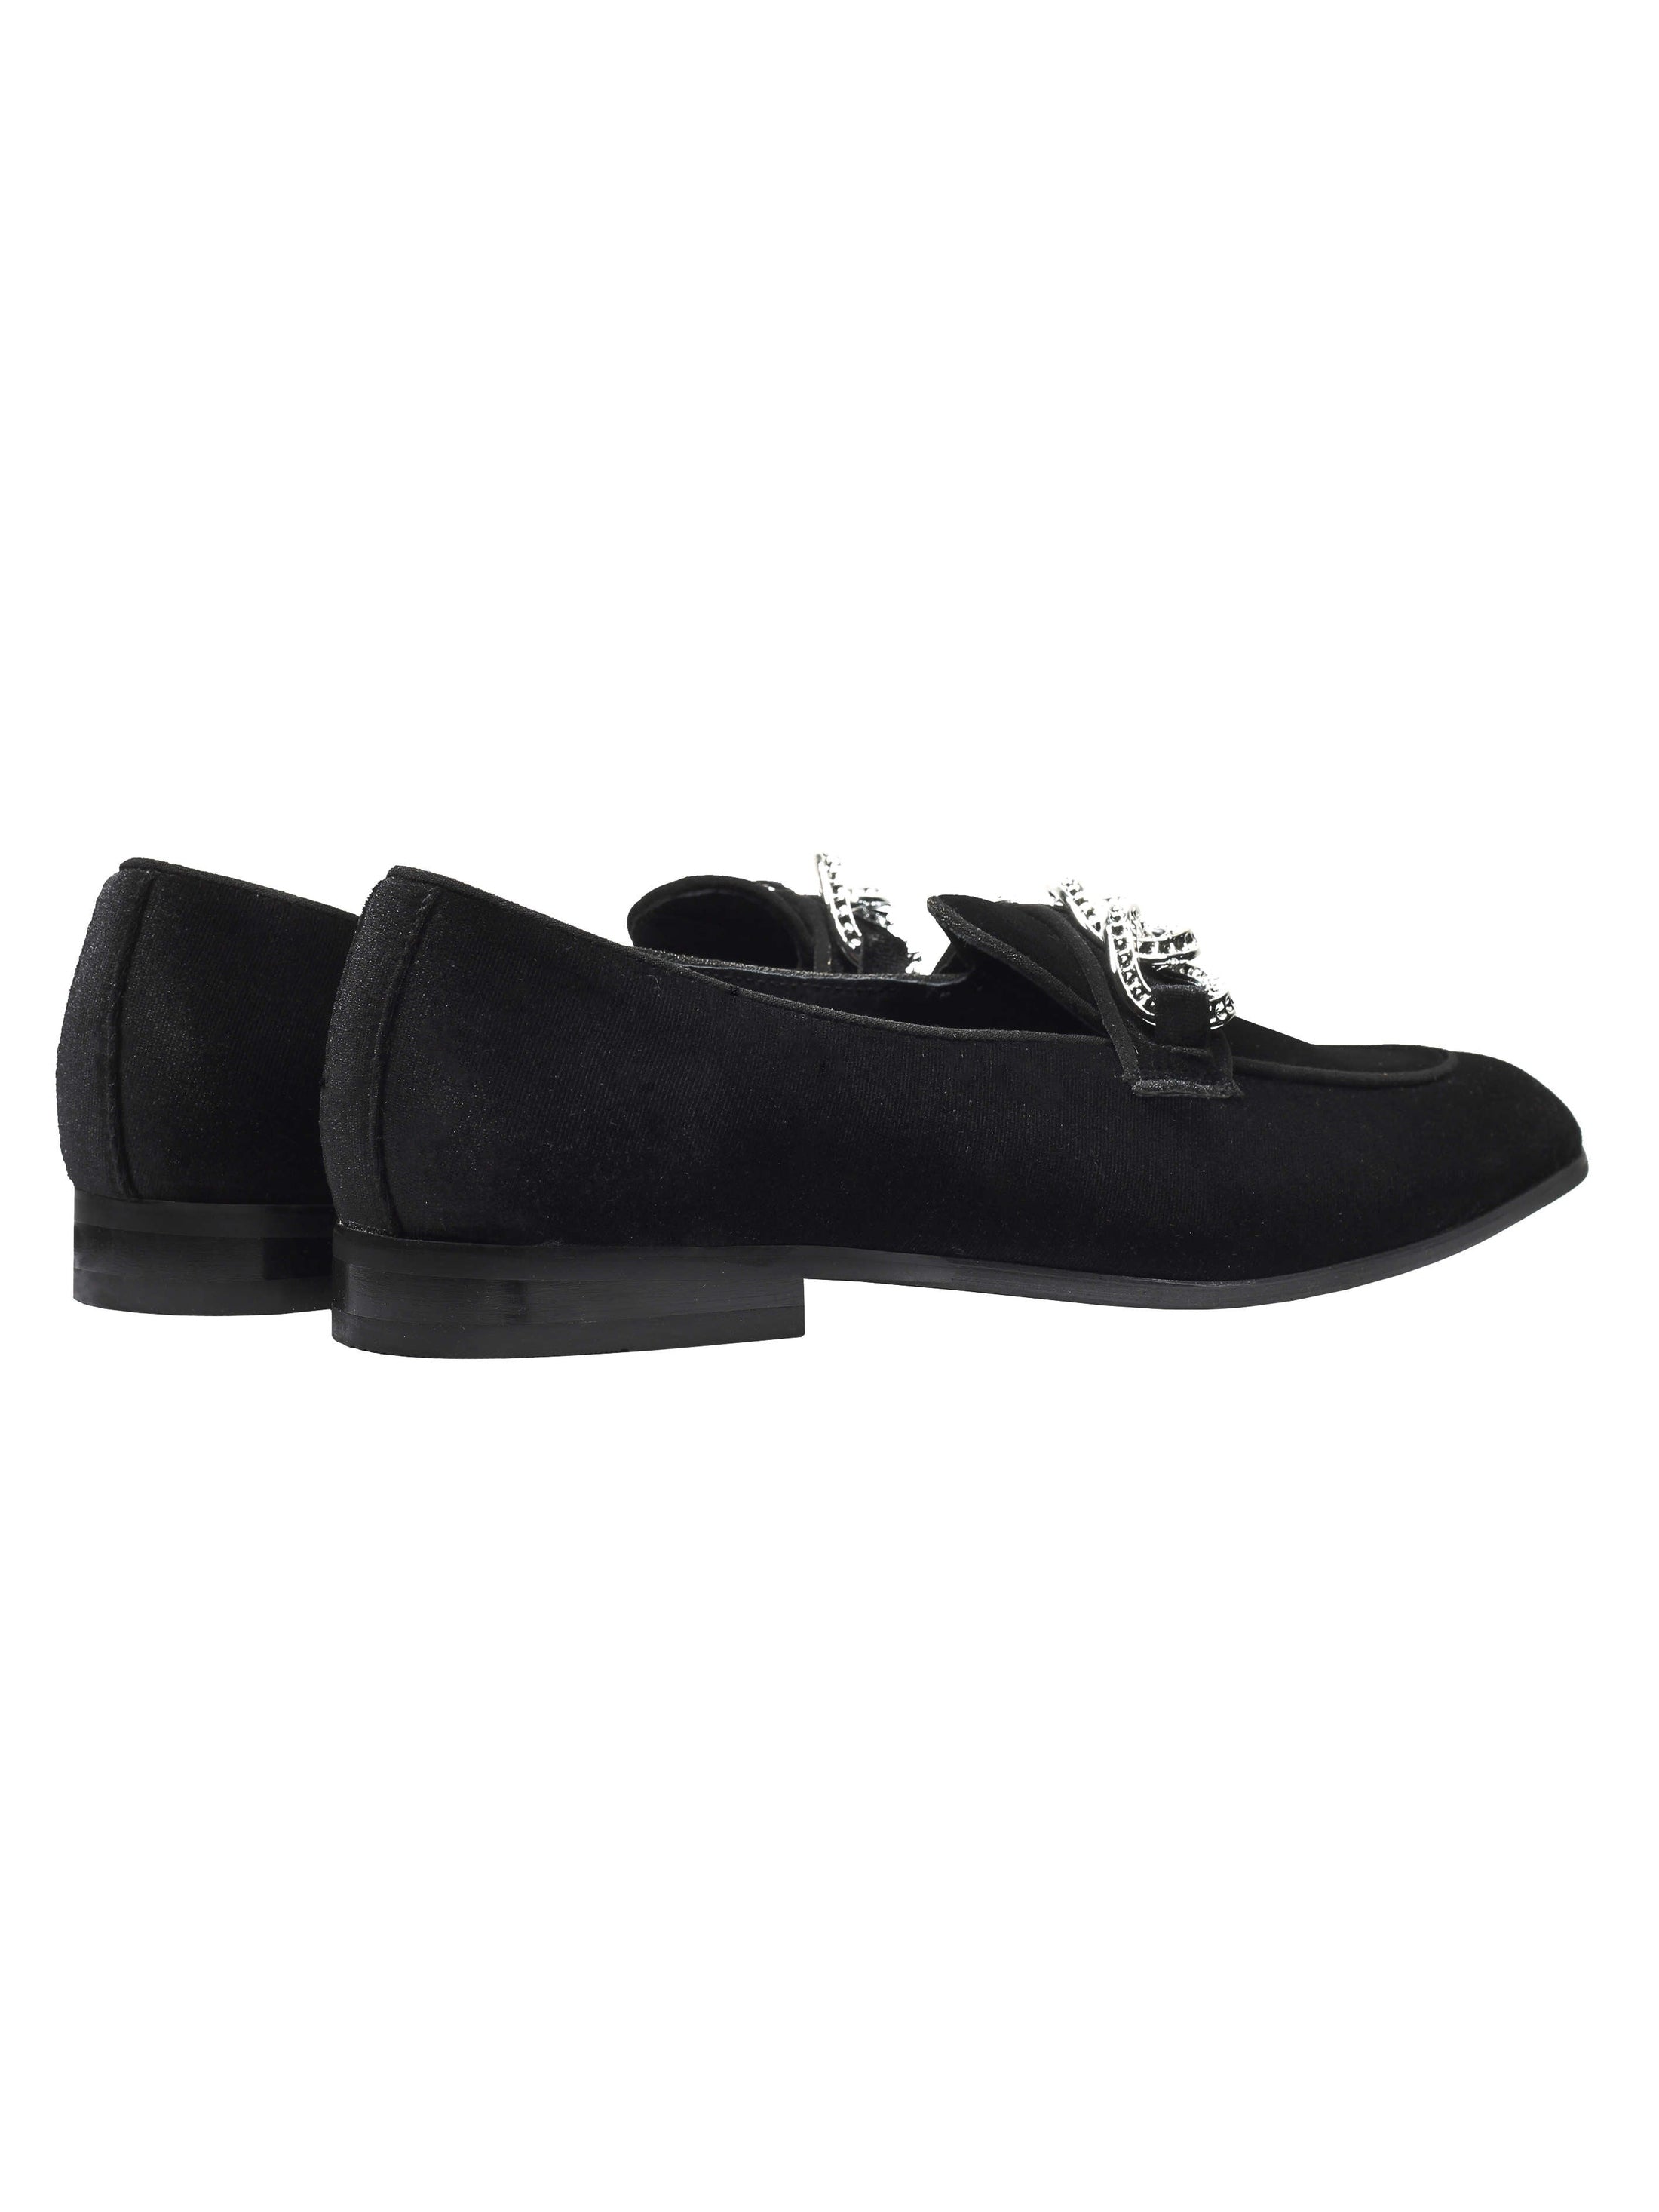 BLACK VELVET LOAFERS WITH DIAMOND CHAIN BUCKLE